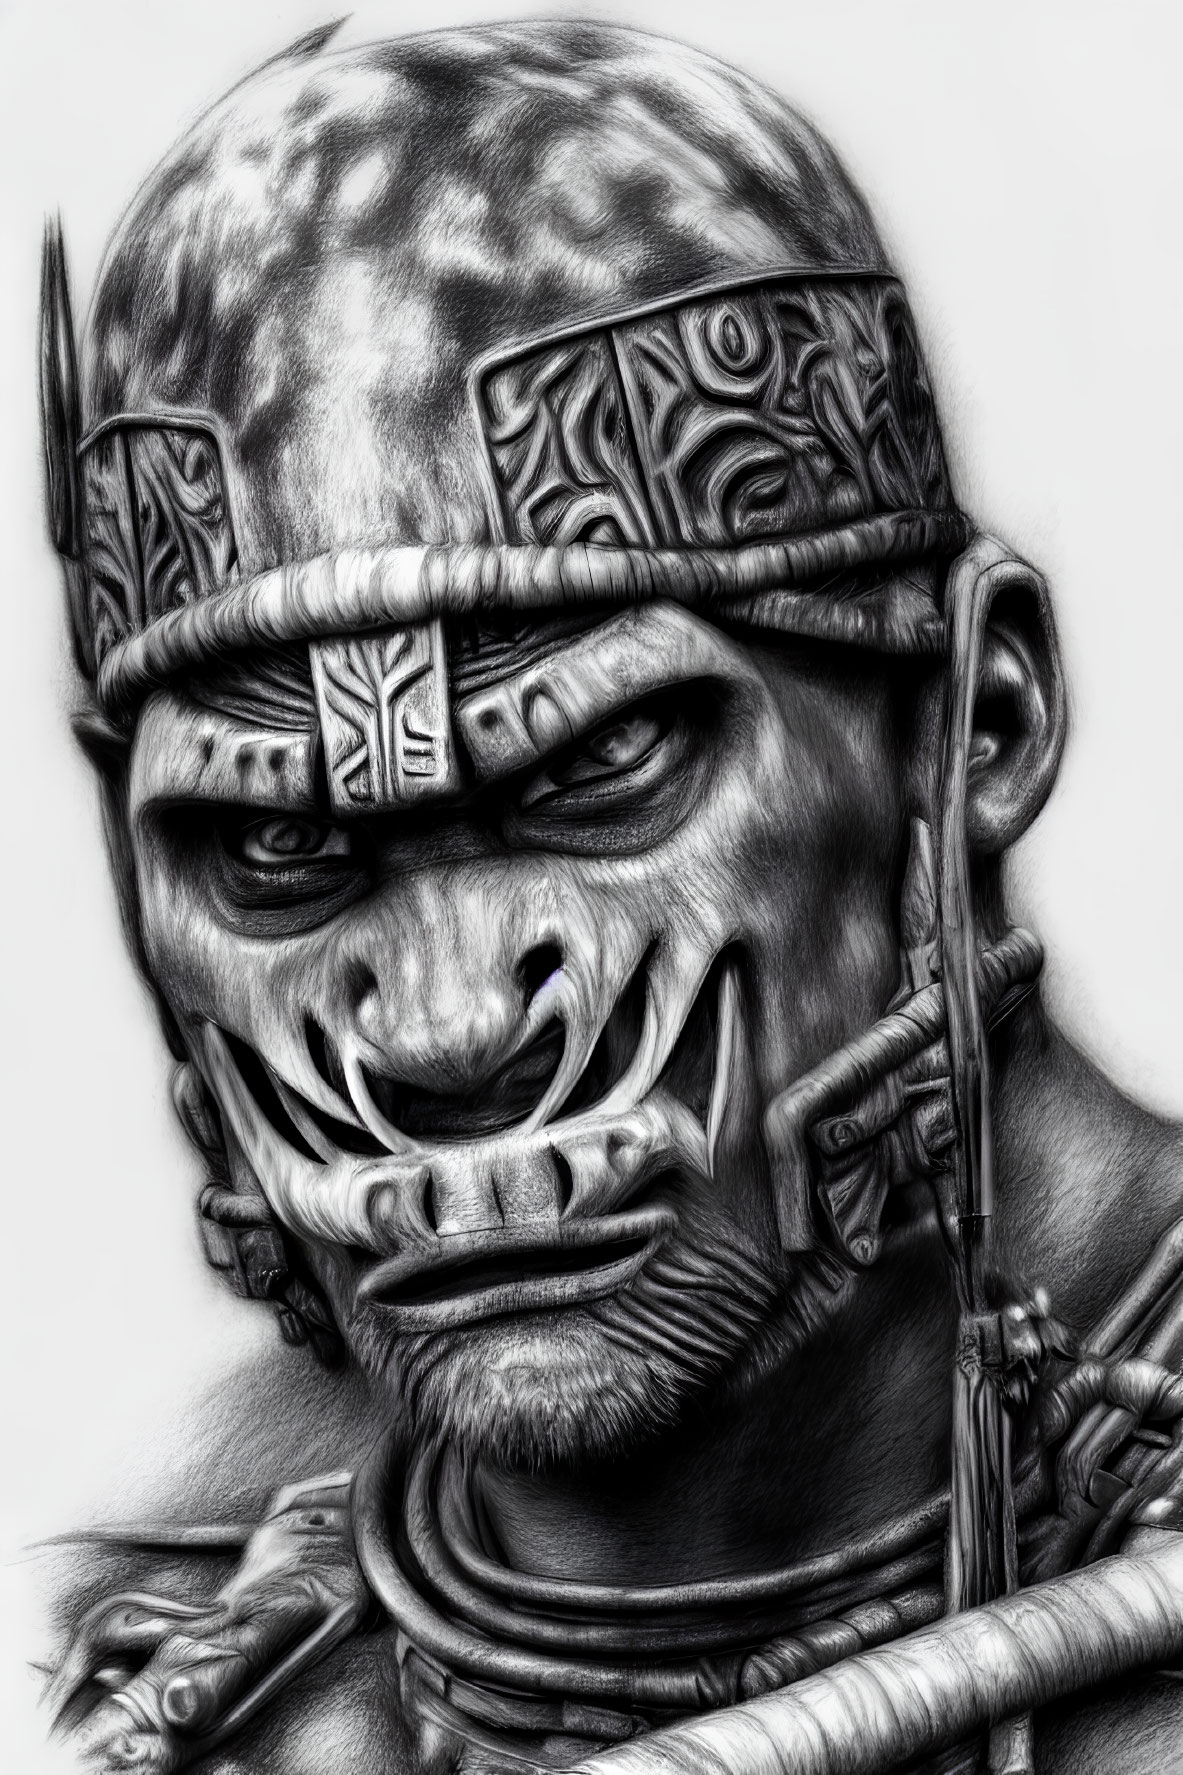 Detailed pencil drawing of menacing warrior with tribal tattoos and decorated helmet